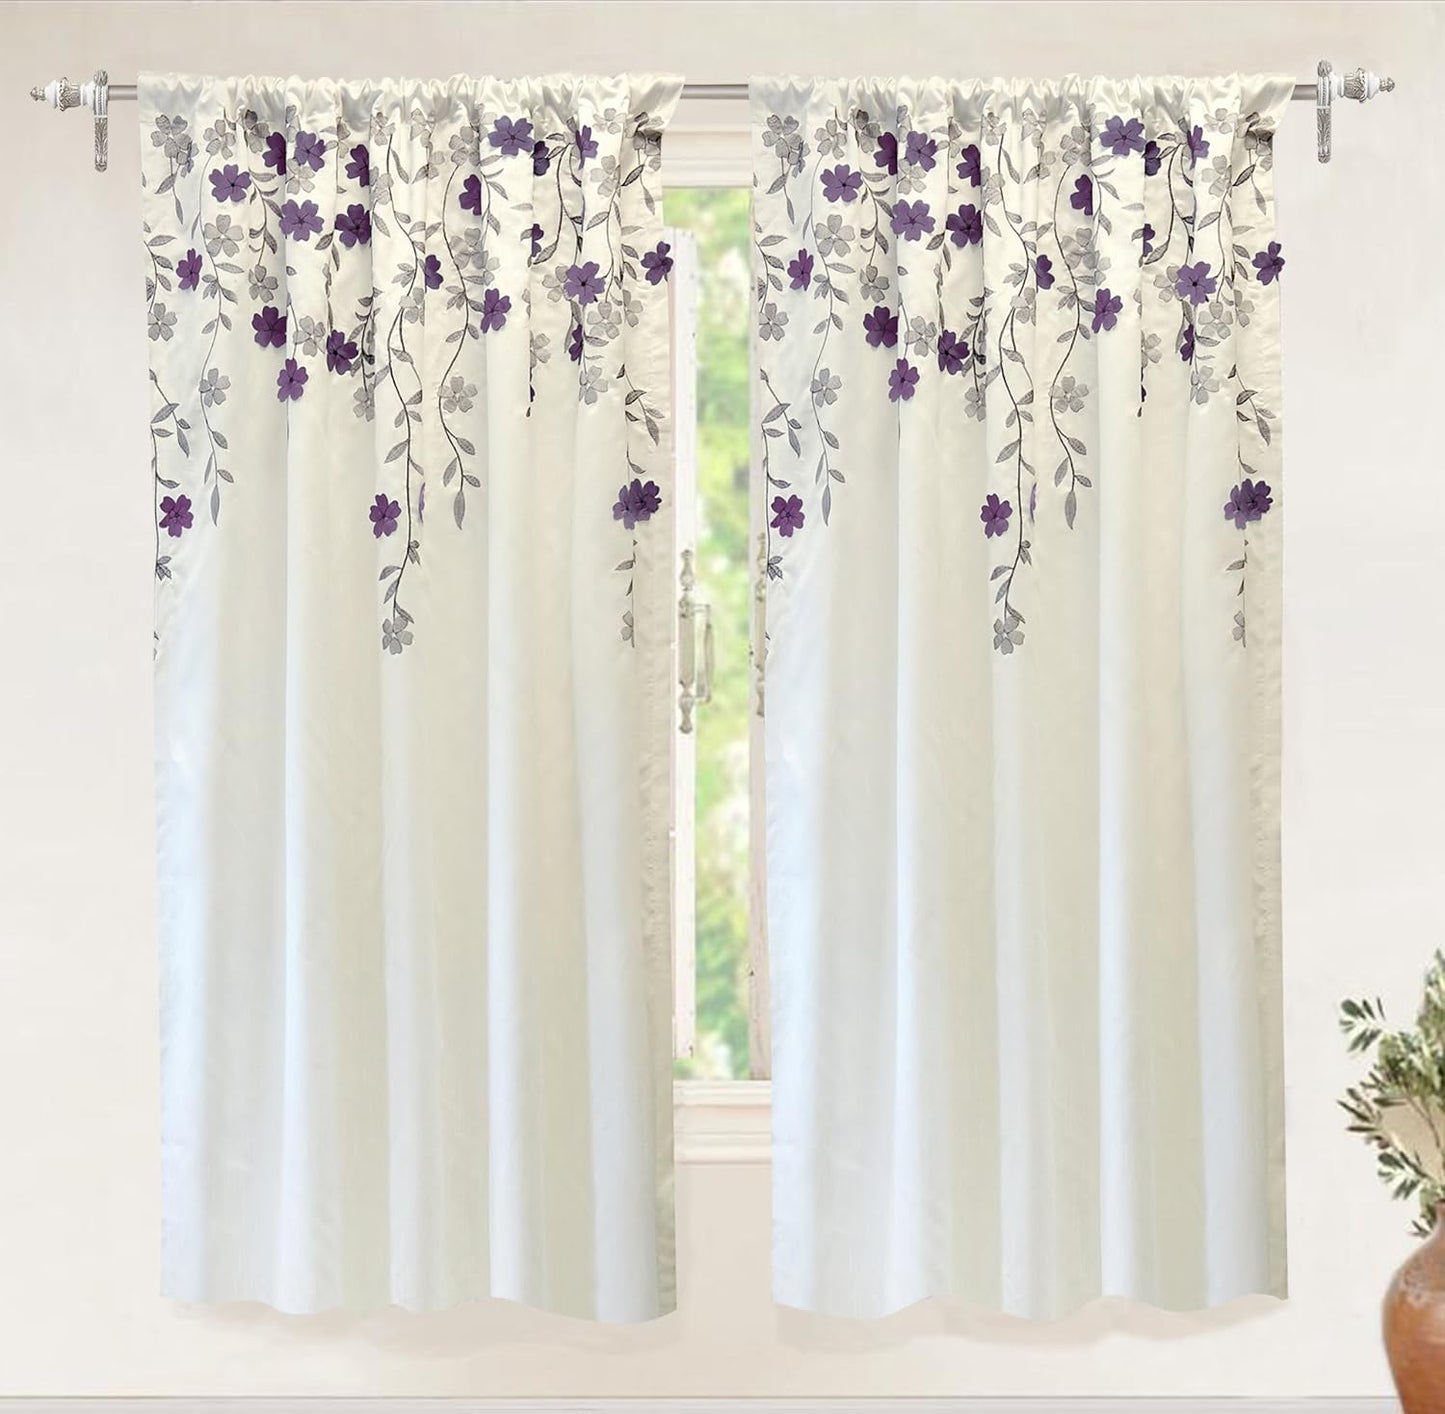 Driftaway Aubree Weeping Flower Print Thermal Room Darkening Privacy Window Curtain for Bedroom Living Room Rod Pocket 2 Panels 52 Inch by 84 Inch Blue  DriftAway One Panel Ivory Purple 50"X63" 